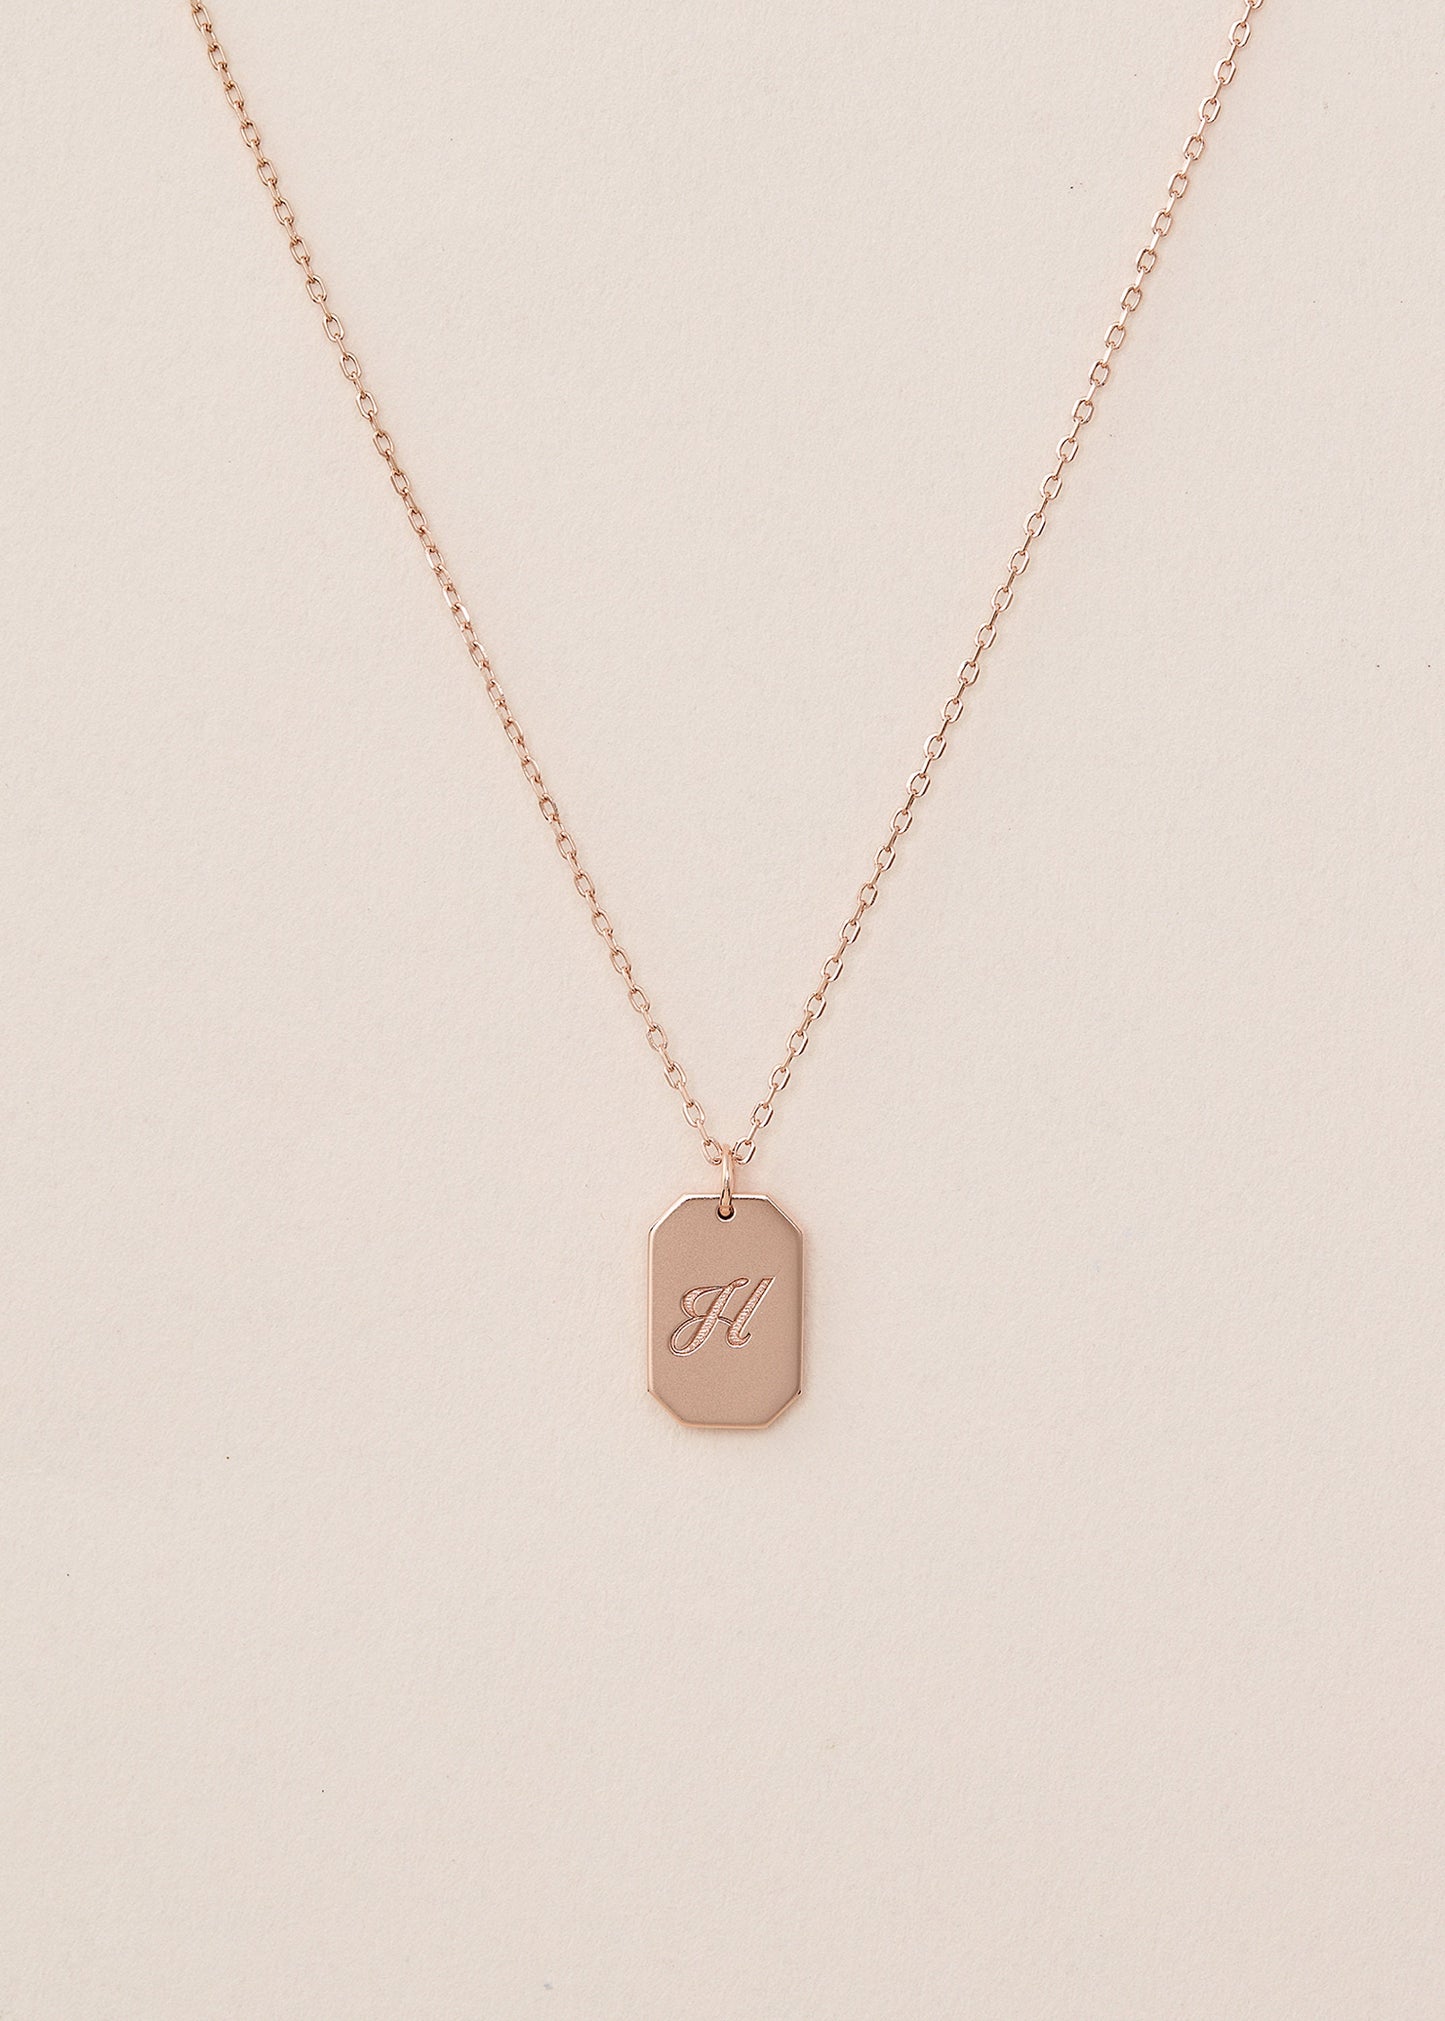 Mini Dog Tag Necklace| Custom Initial Necklace | Initial Charm Necklace - Personalized Necklace - Personalized Gift - Mother's Day Gift